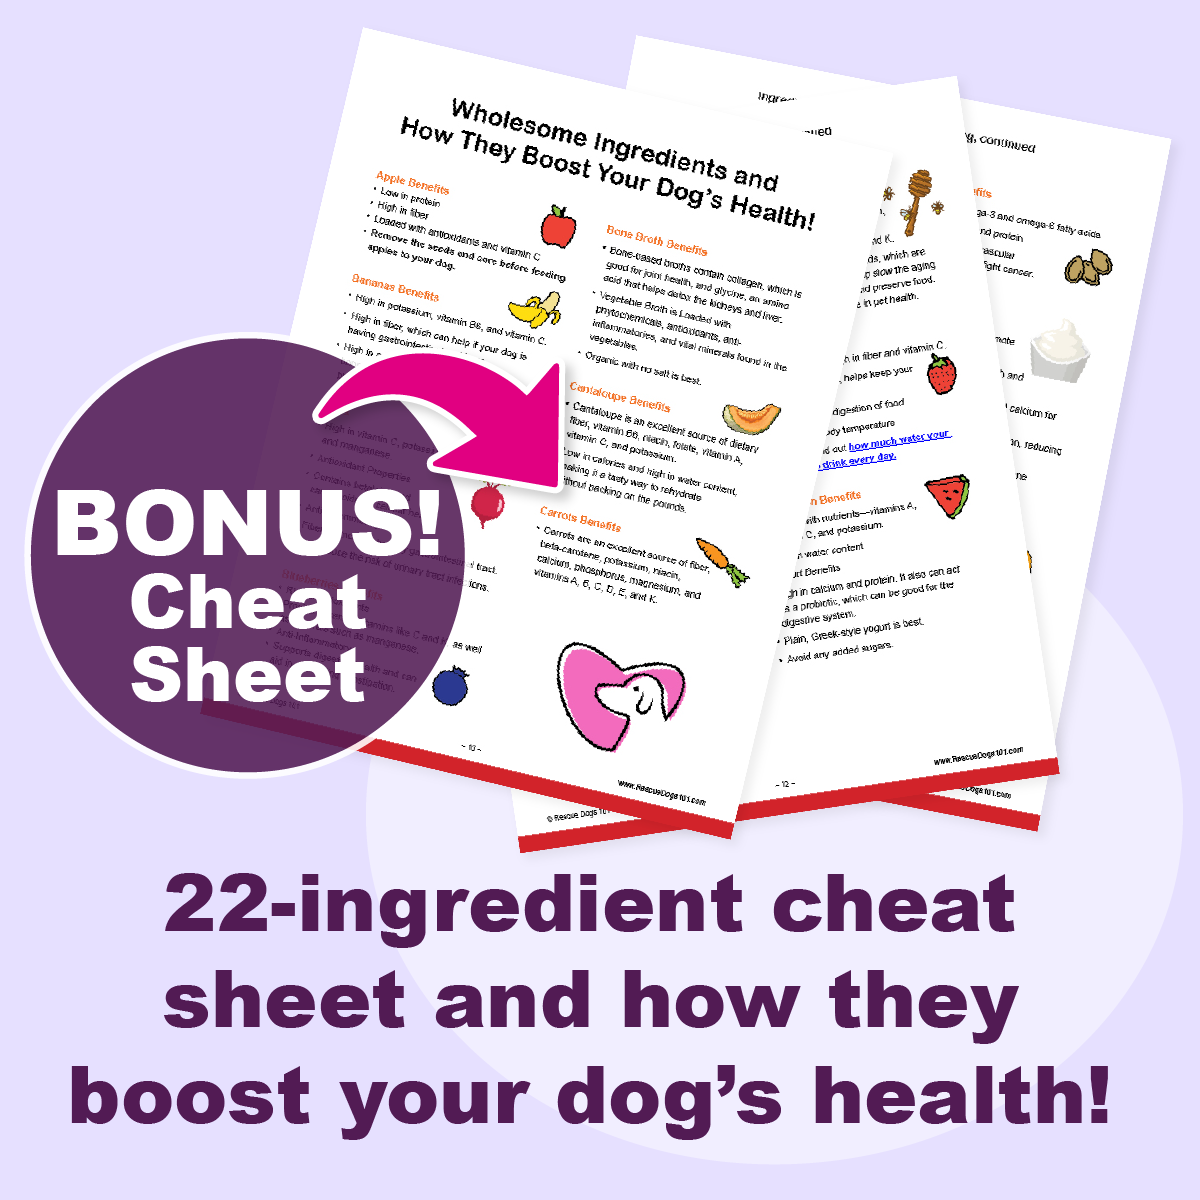 Cheat sheet showing ingredients that are healthy for dogs.